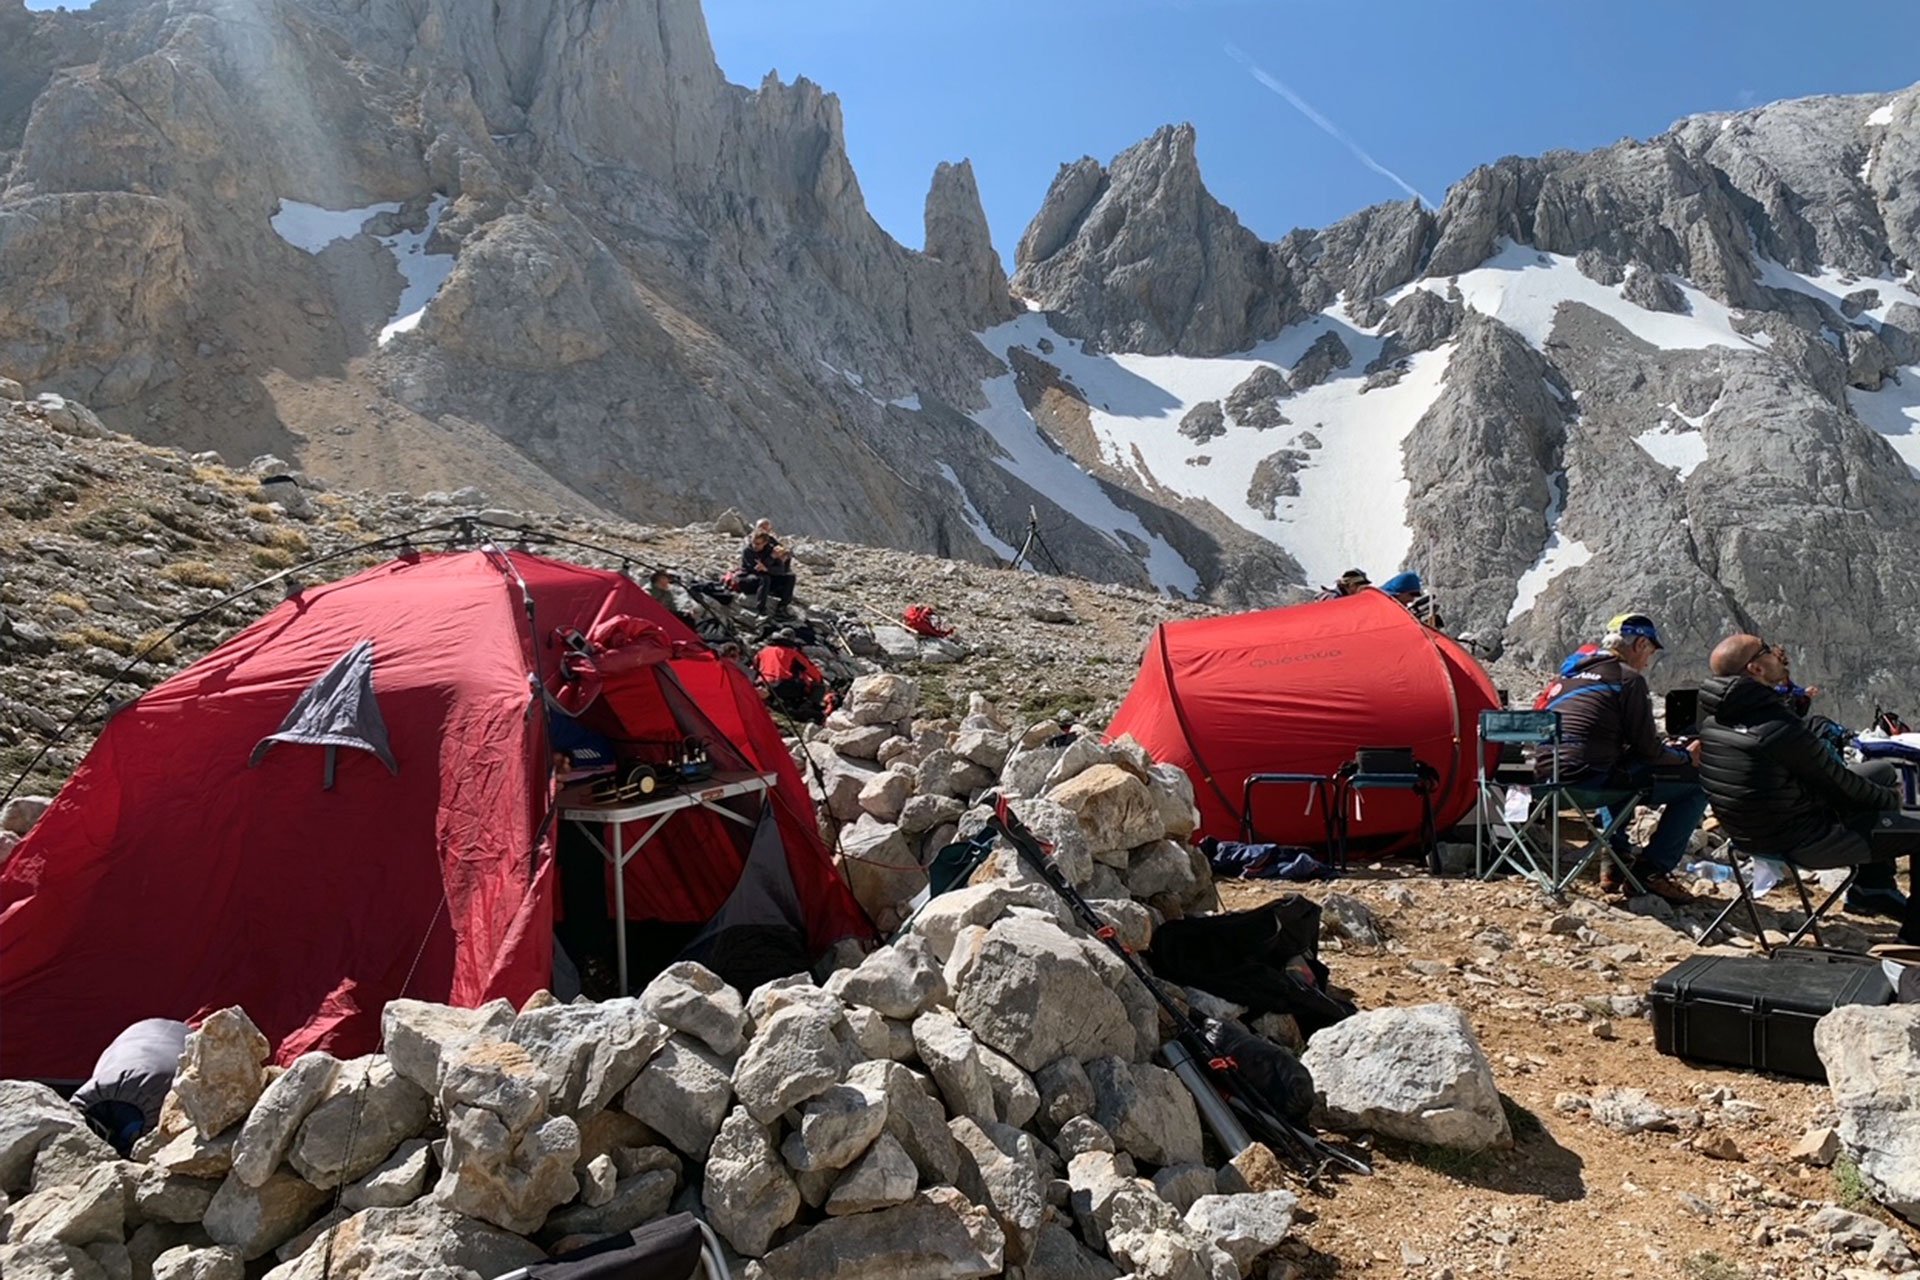 NR-Dejero live streams heroic sportsman’s ascent to remote Spanish summit